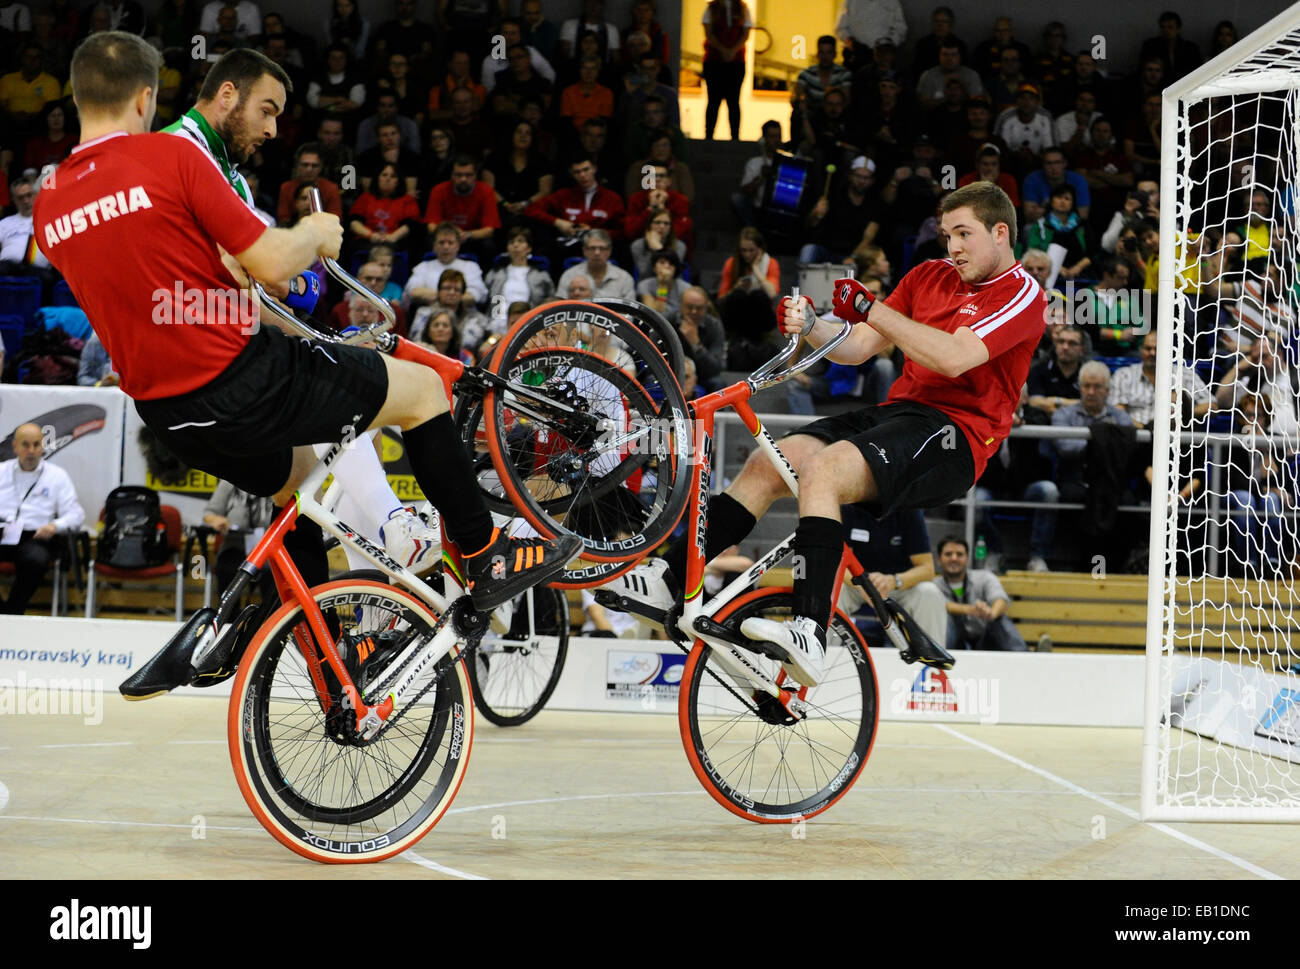 From left: Markus Broell of Austria, Dominik Planzer of Schwitzerland and Patrick Schnetzer of Austria pictured during the Cycle Ball final at the Indoor Cycling World Championships 2014 in Brno, Czech Republic, November 23, 2014. (CTK Photo/Vaclav Salek) Stock Photo